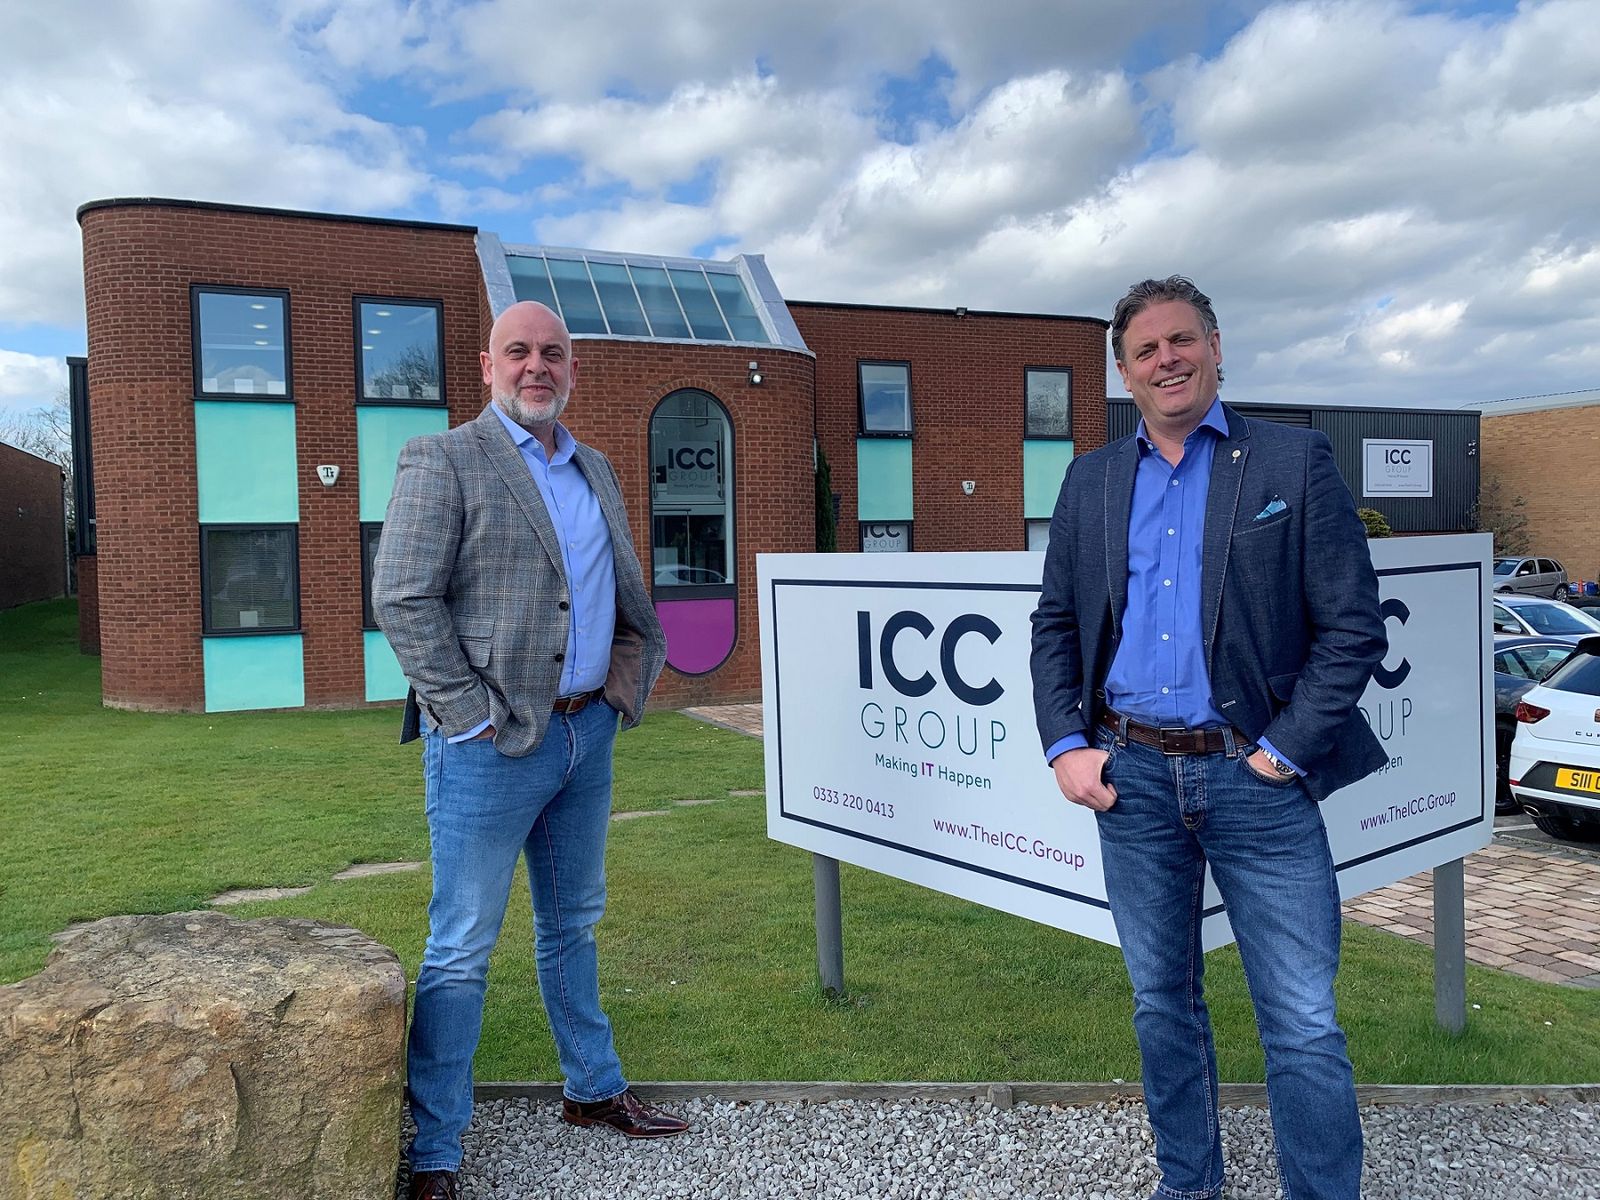 Vapour and ICC join forces to deliver next-generation managed service proposition